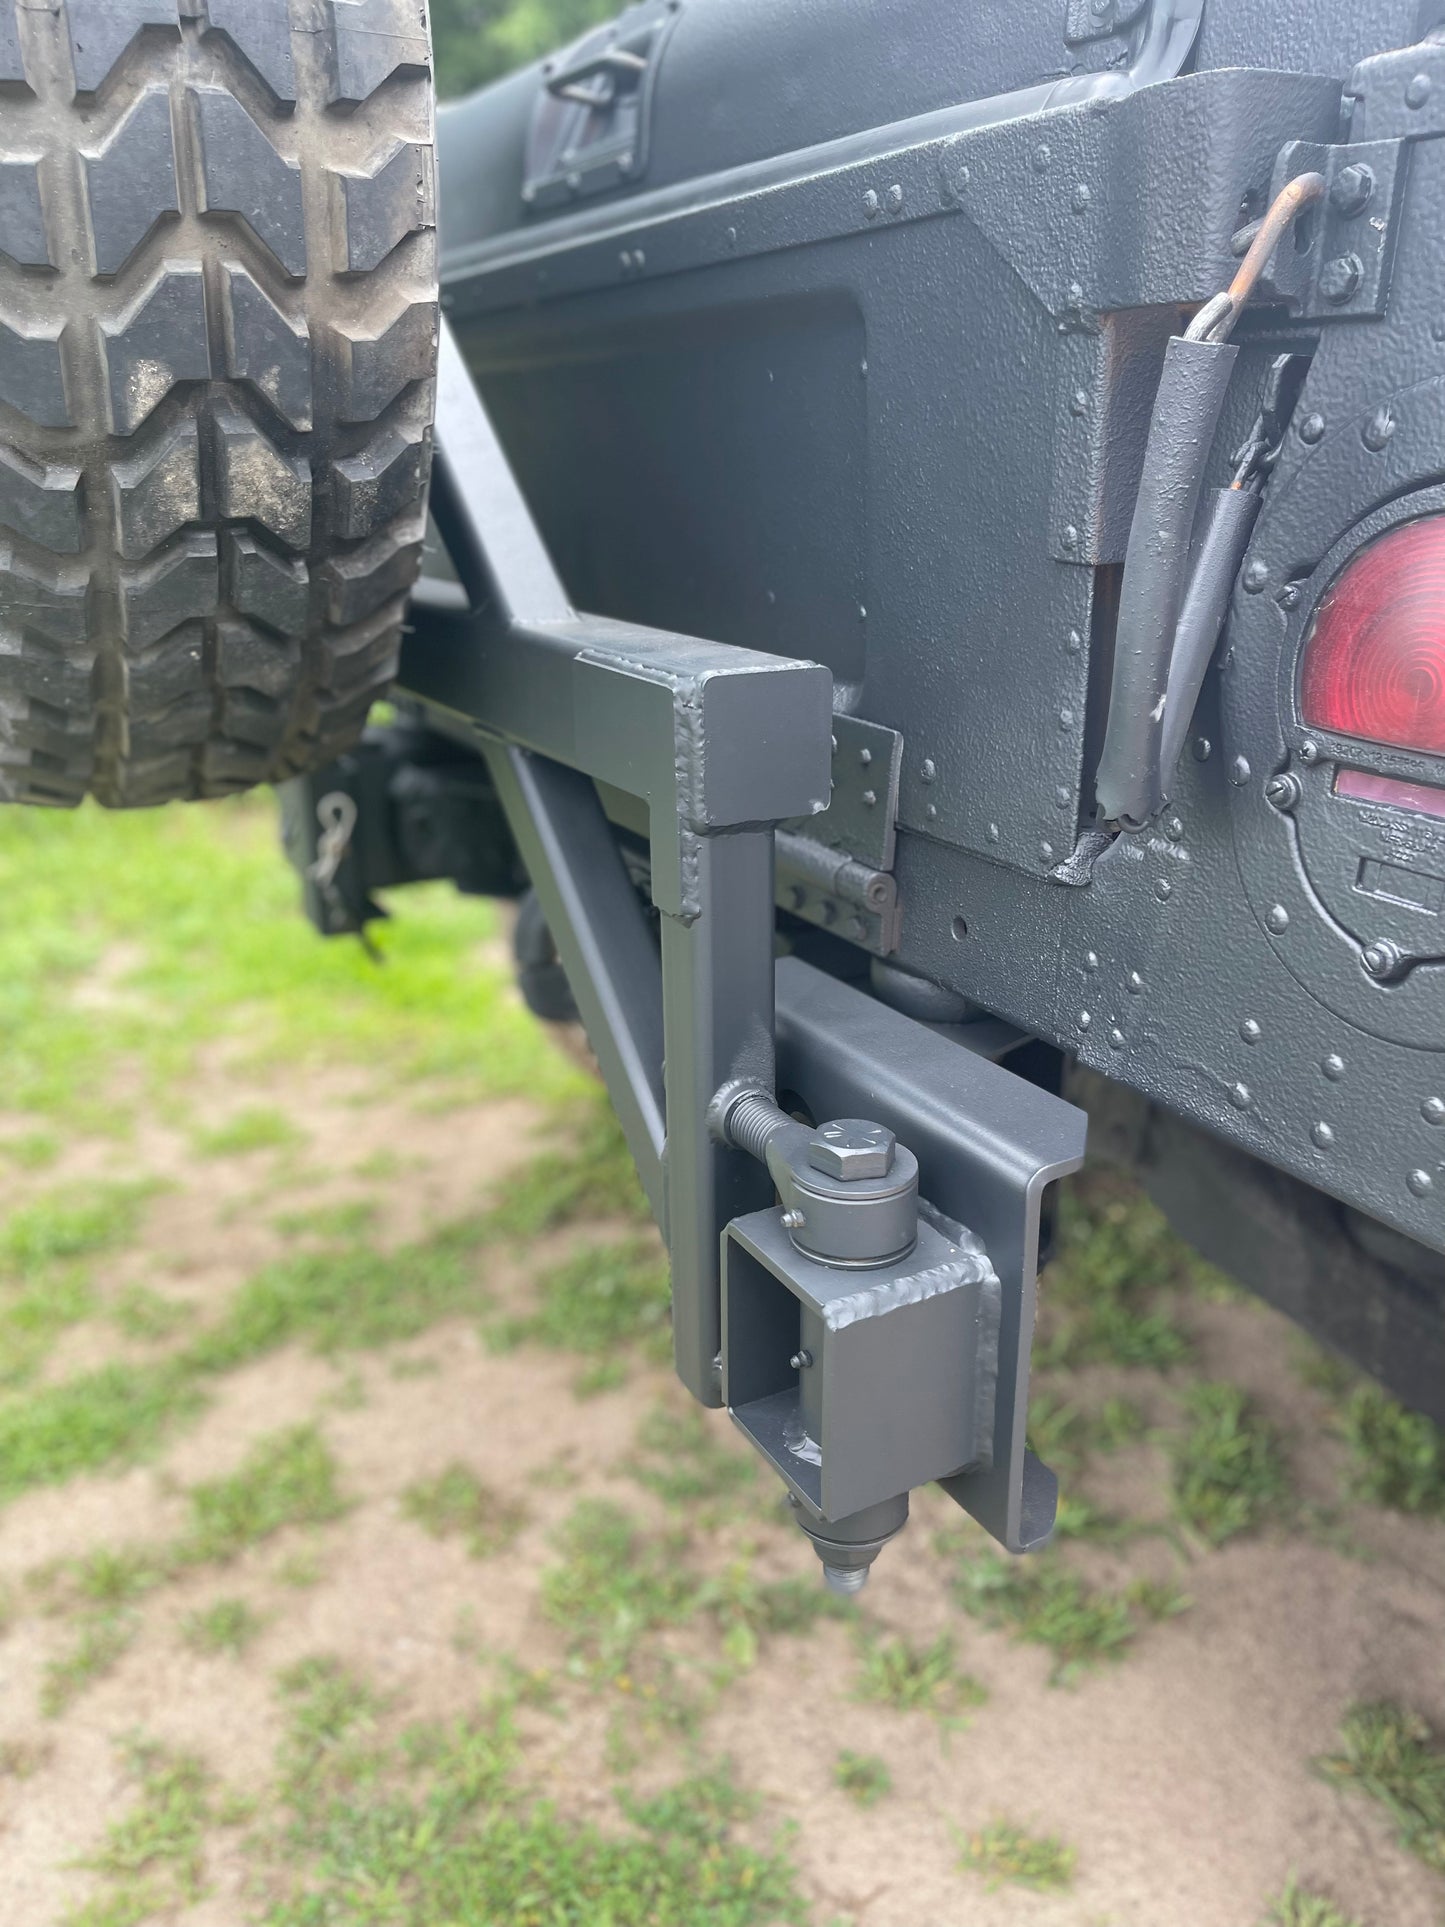 Bumperless Swing Away Tire Carrier for Military Humvee - Rear Bumper / M998 / M1038 / HMMWV Vehicles